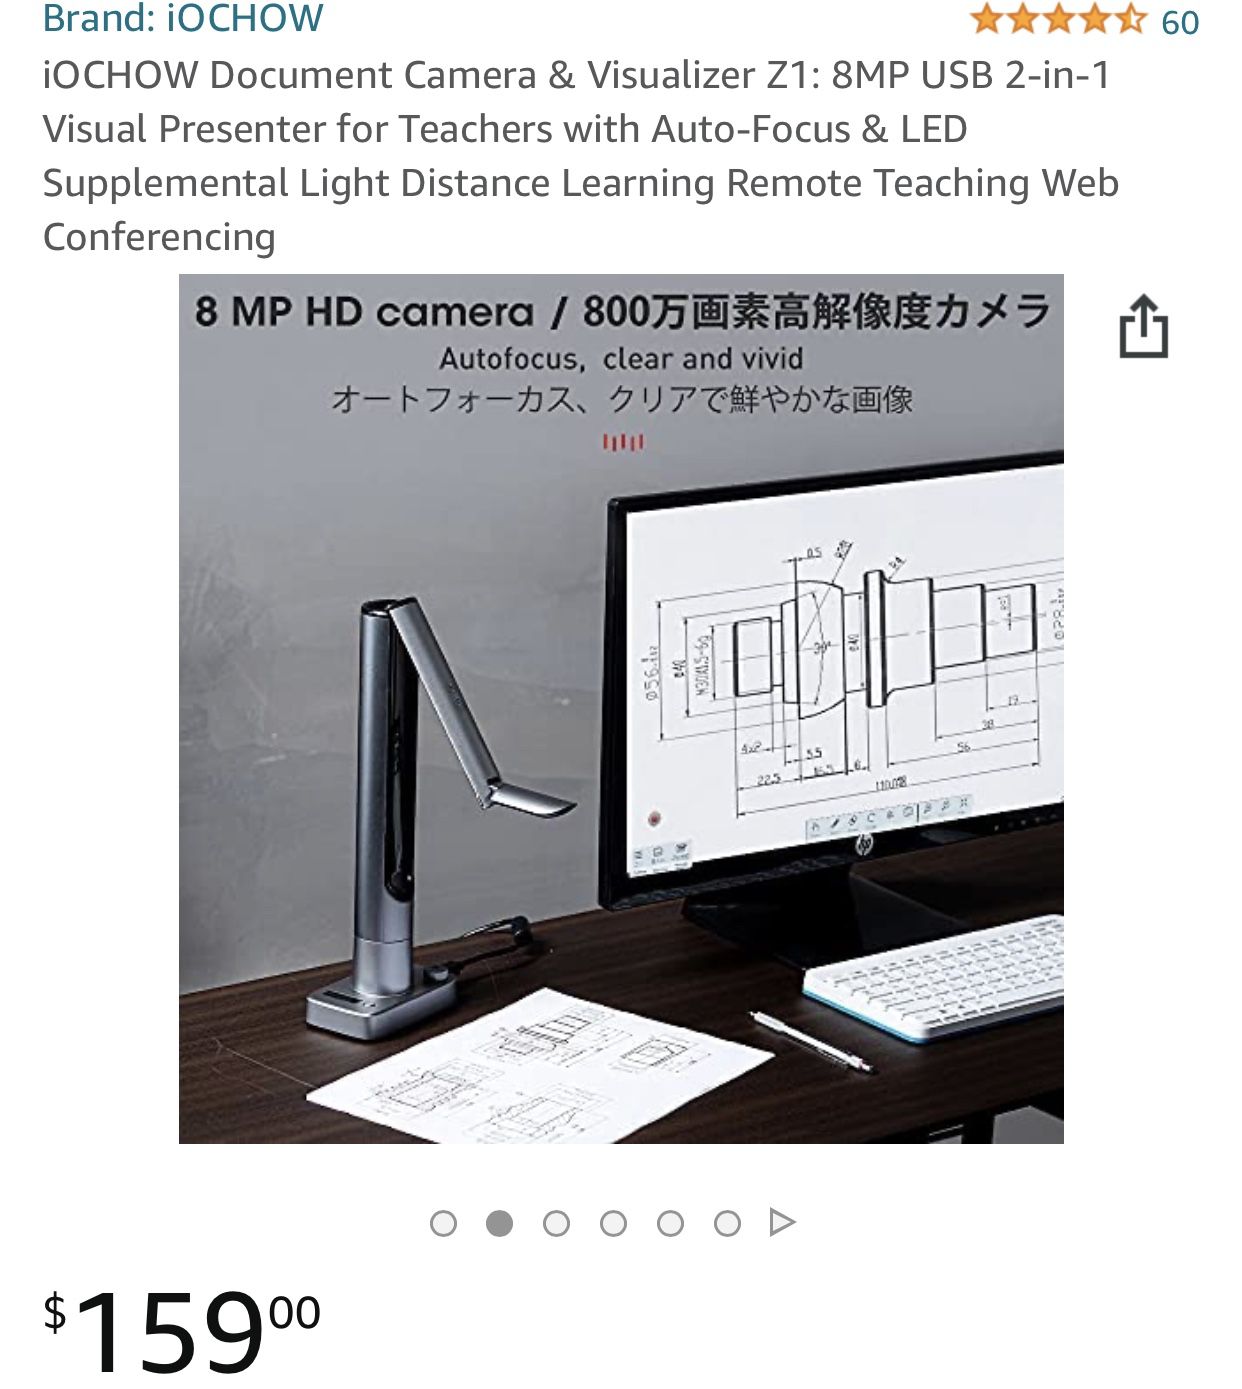 Document Camera & Visualizer Z1: 8MP USB 2-in-1 Visual Presenter for Teachers with Auto-Focus & LED Supplemental Light Distance Learning Remote Teachi